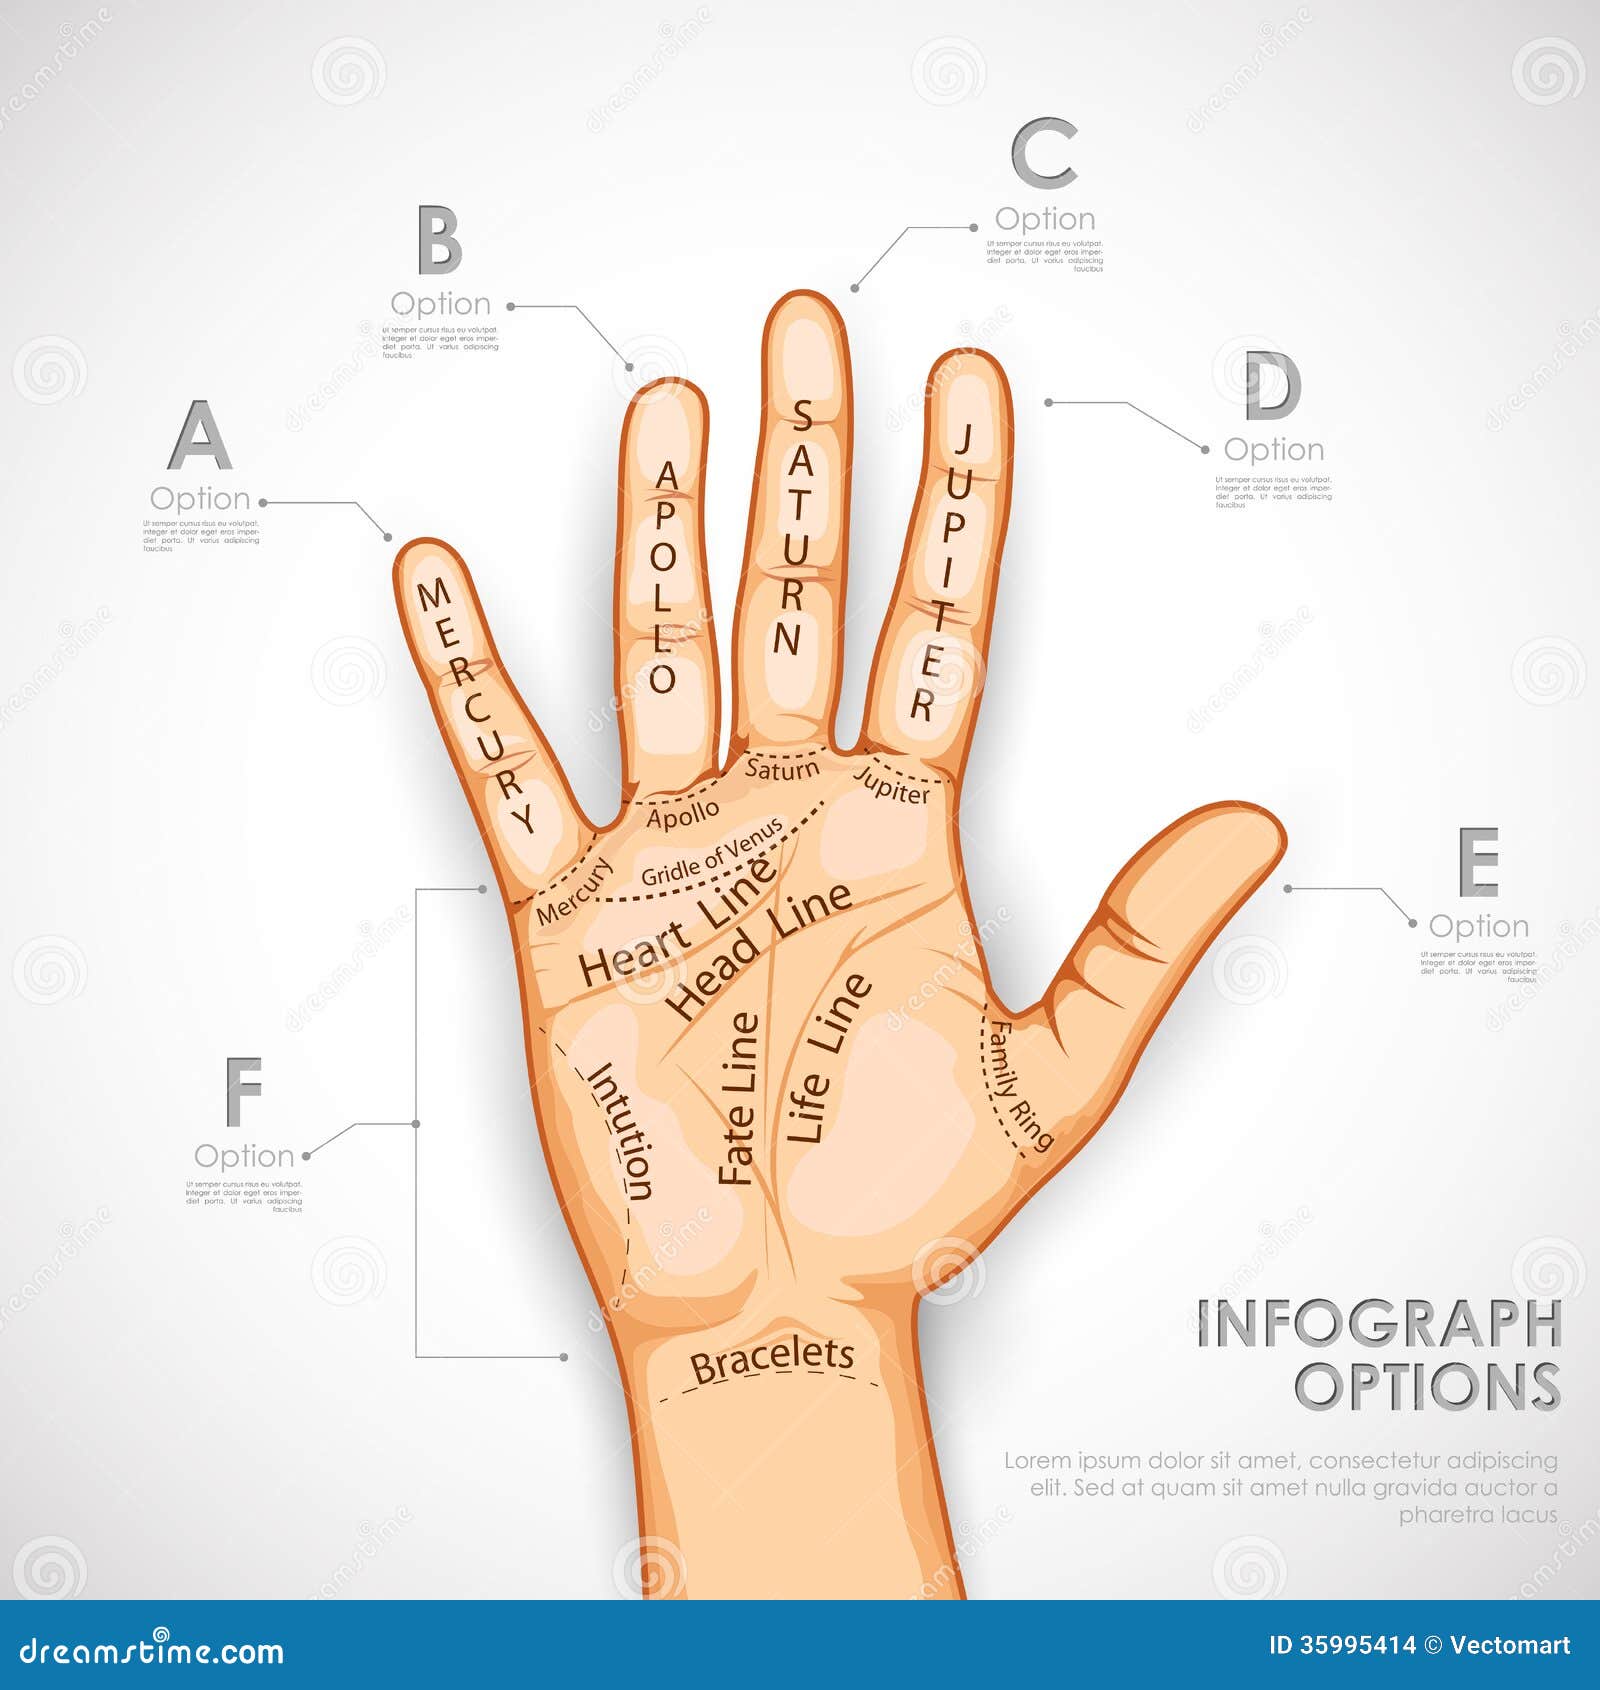 How To Read Palms: A Guide To The Lines On Your Hand